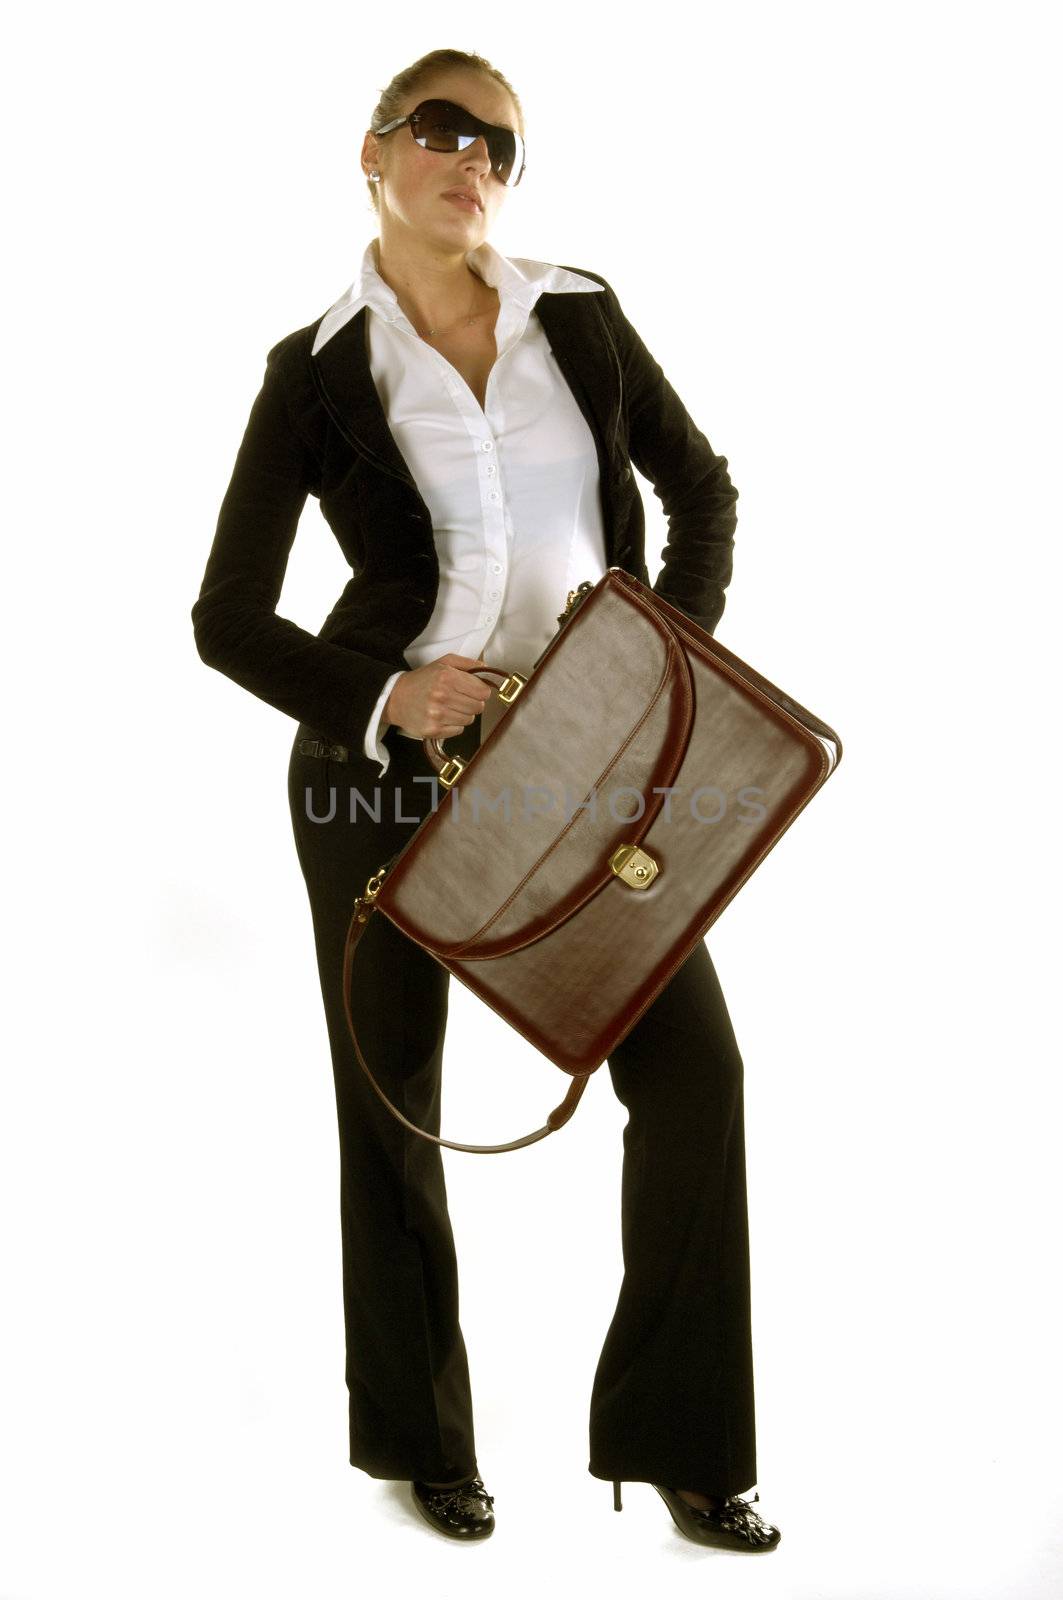 BusinessWoman care on briefcase by adamr